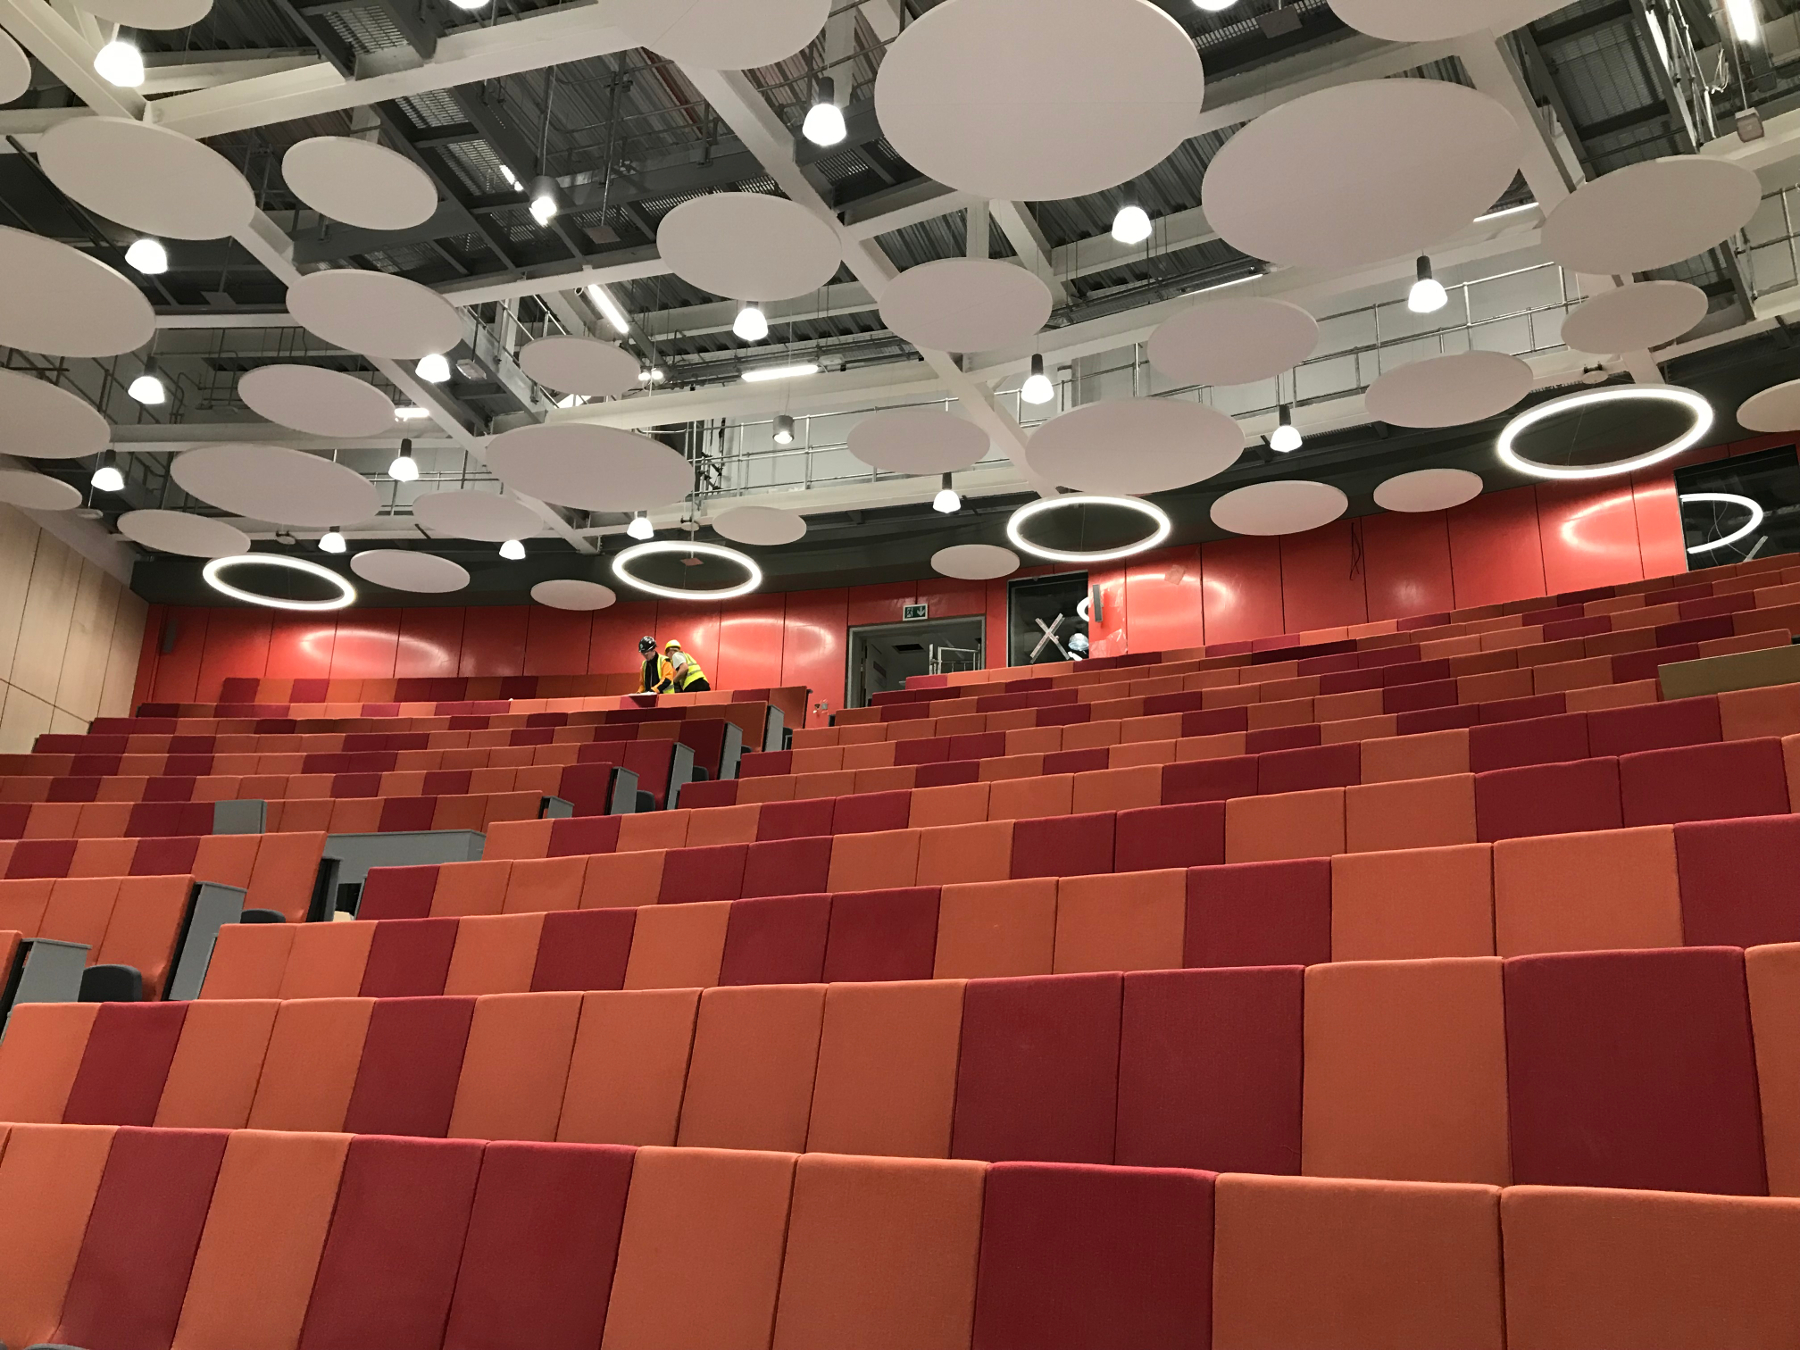 Lecture theatre seating